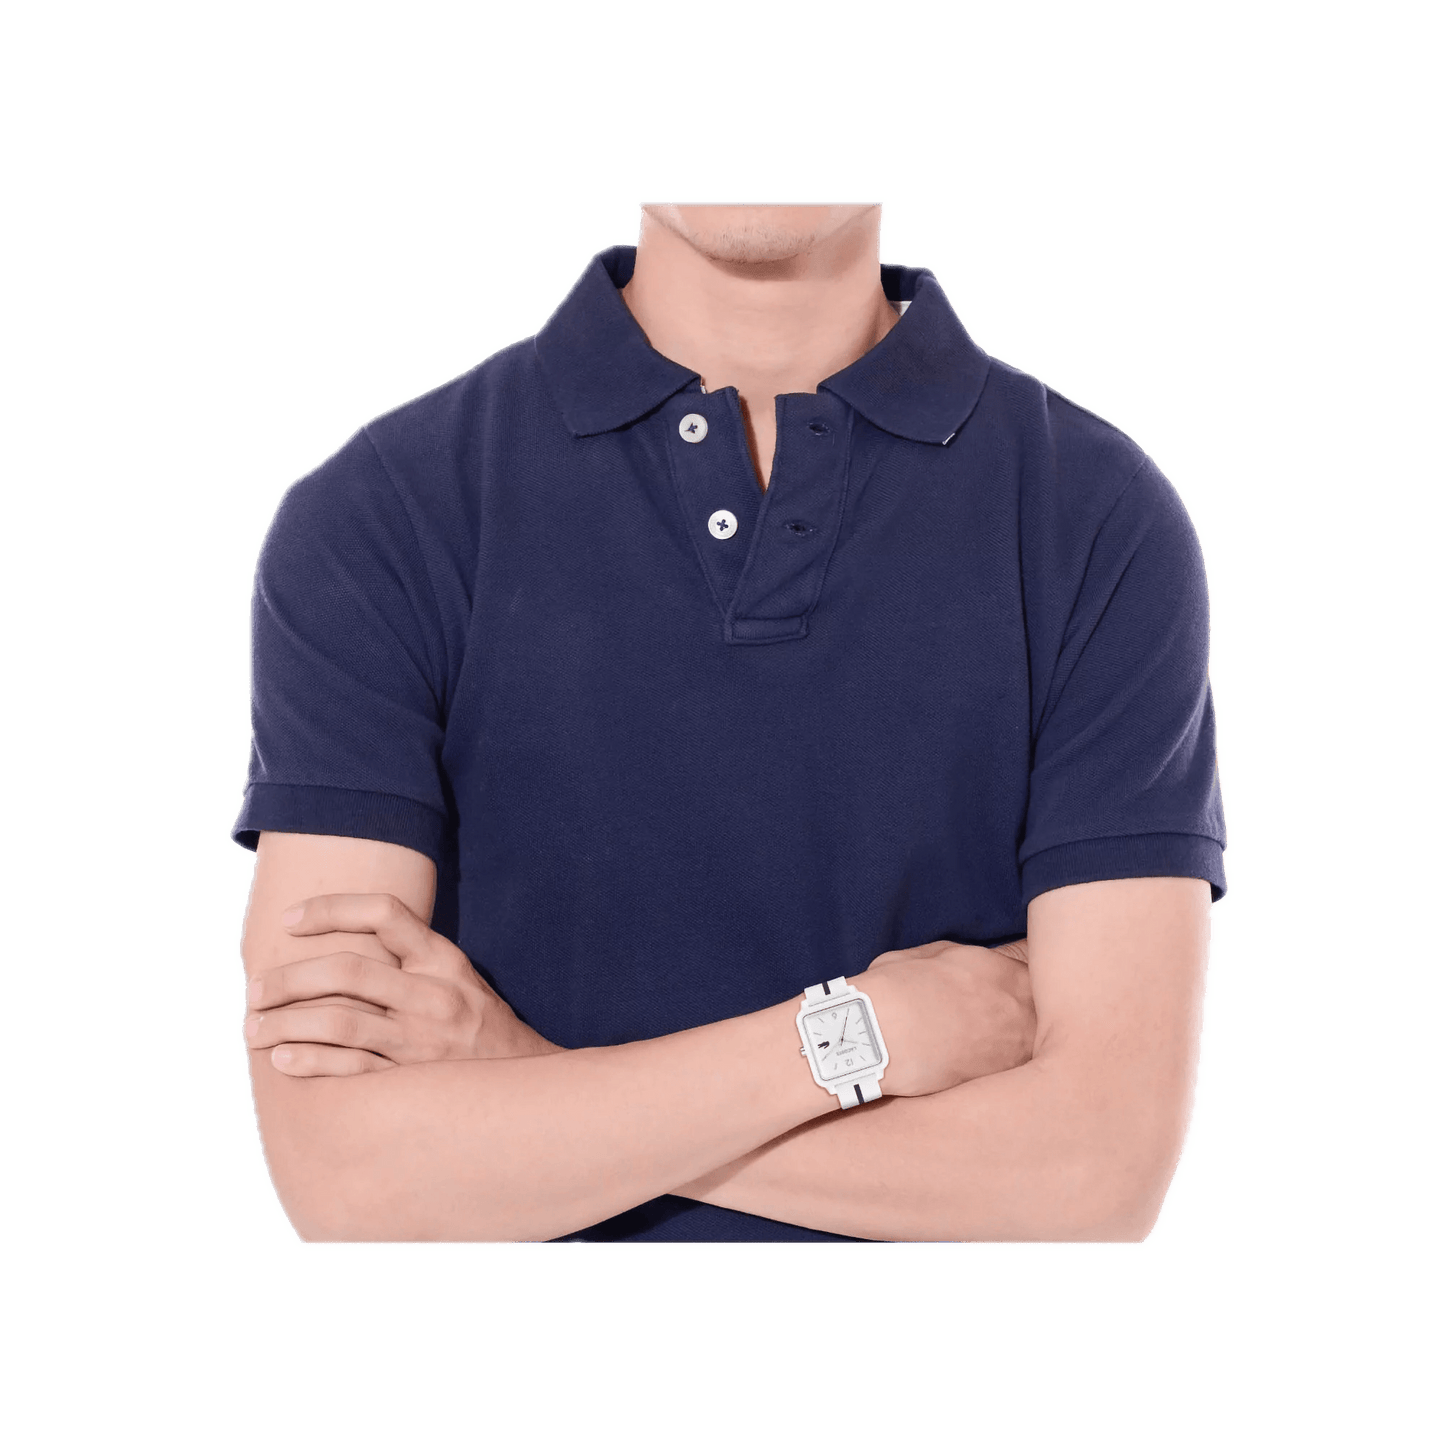 Man in navy blue polo shirt with crossed arms and a Lacoste 12.12 Studio 3 Hands Watch White Silicone on his wrist, no visible head, against a green background.